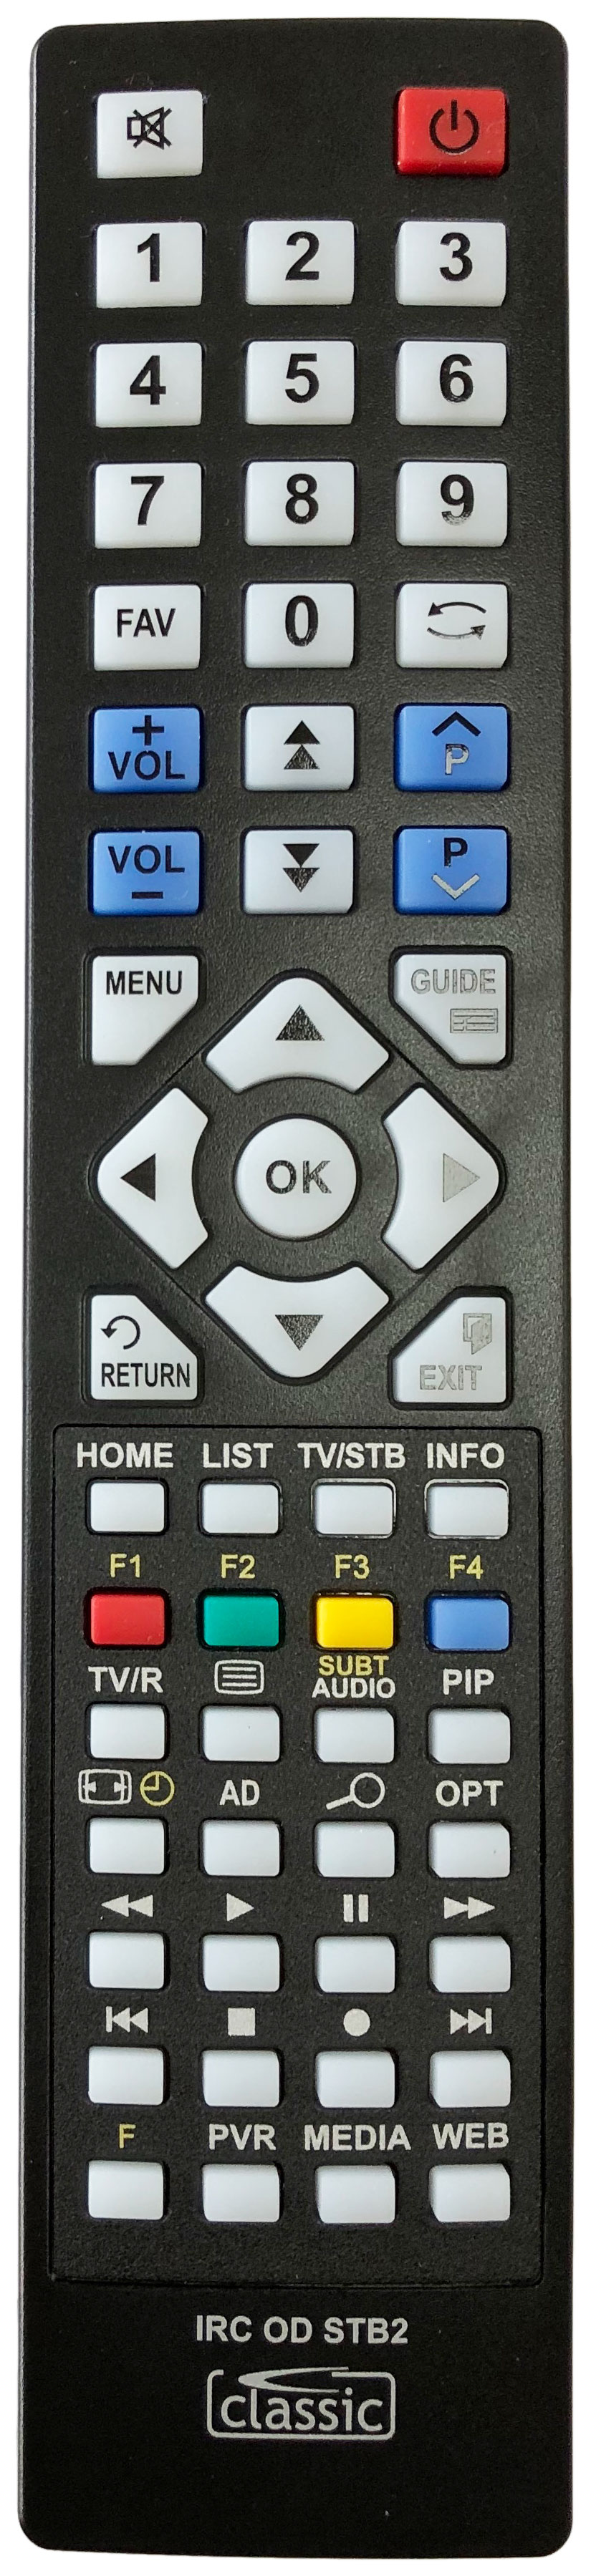 PHILIPS HDT8520 Remote Control